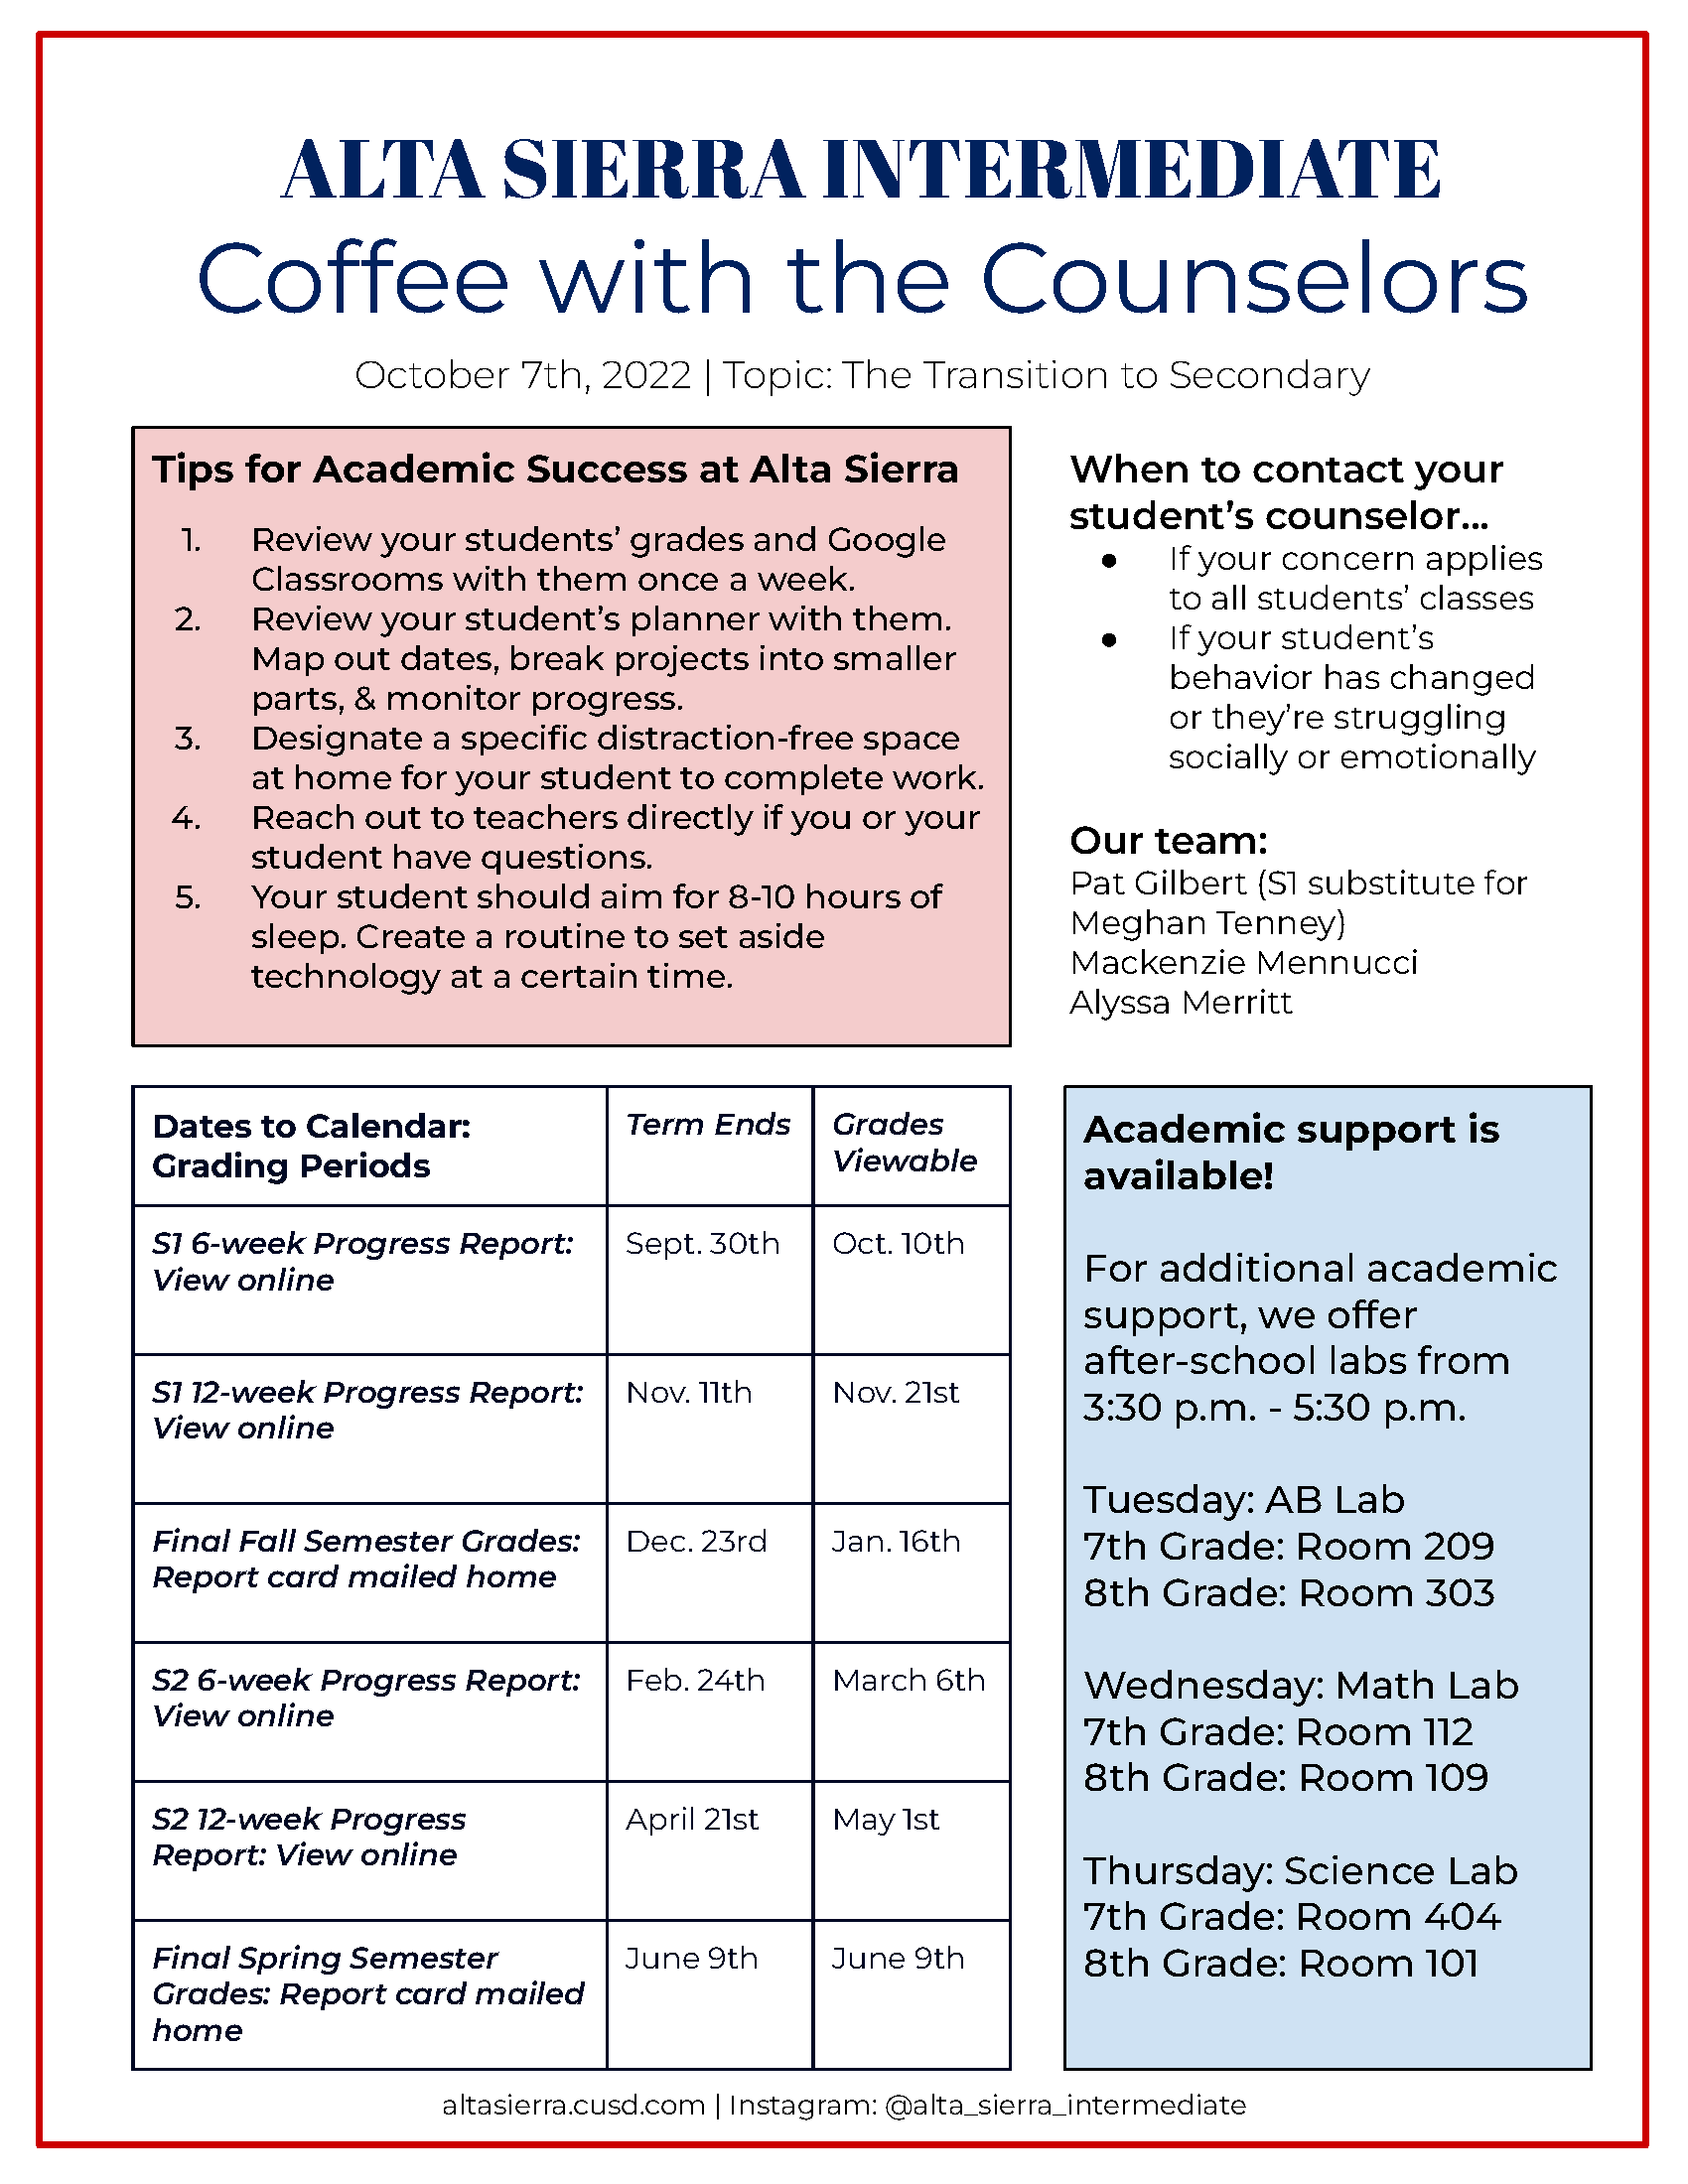 Coffee with the Counselors Fall 2022